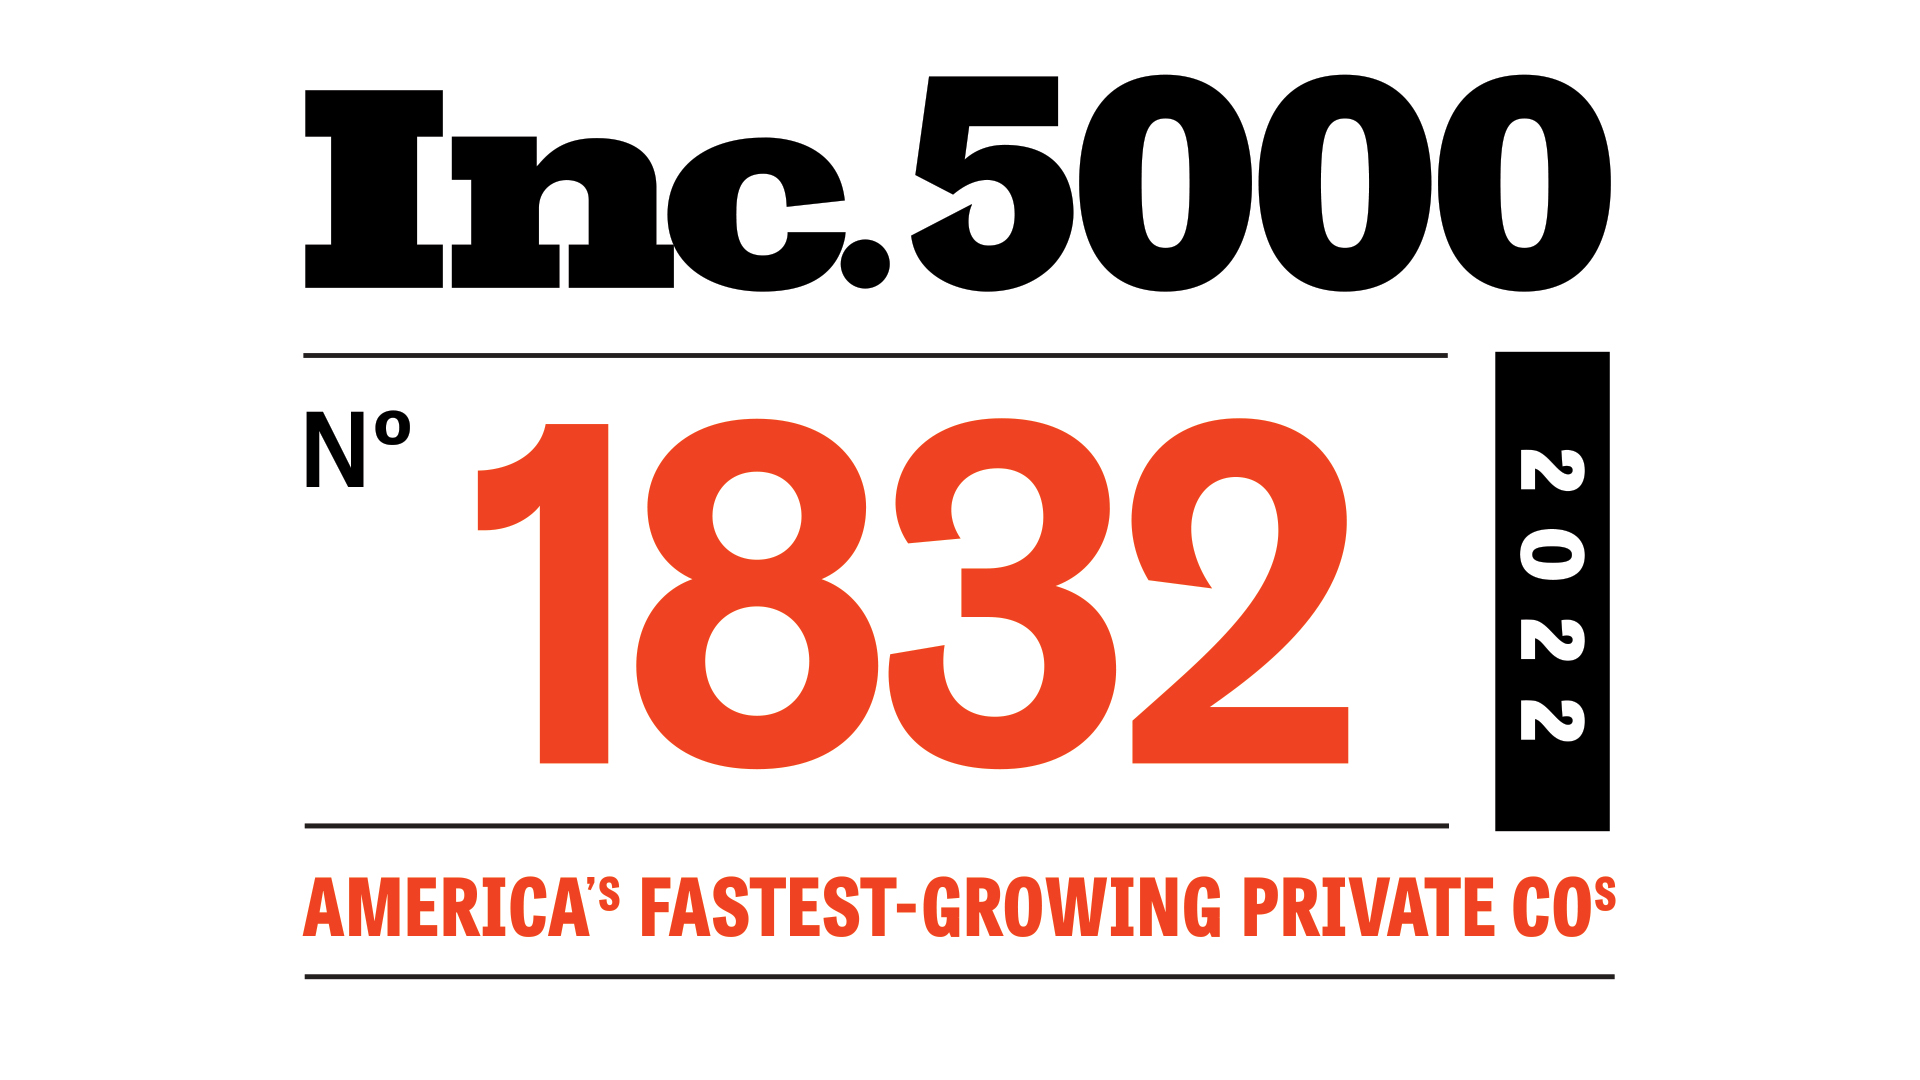 ThoroughCare Named One of Nation’s Fastest Growing Companies by Inc. 5000